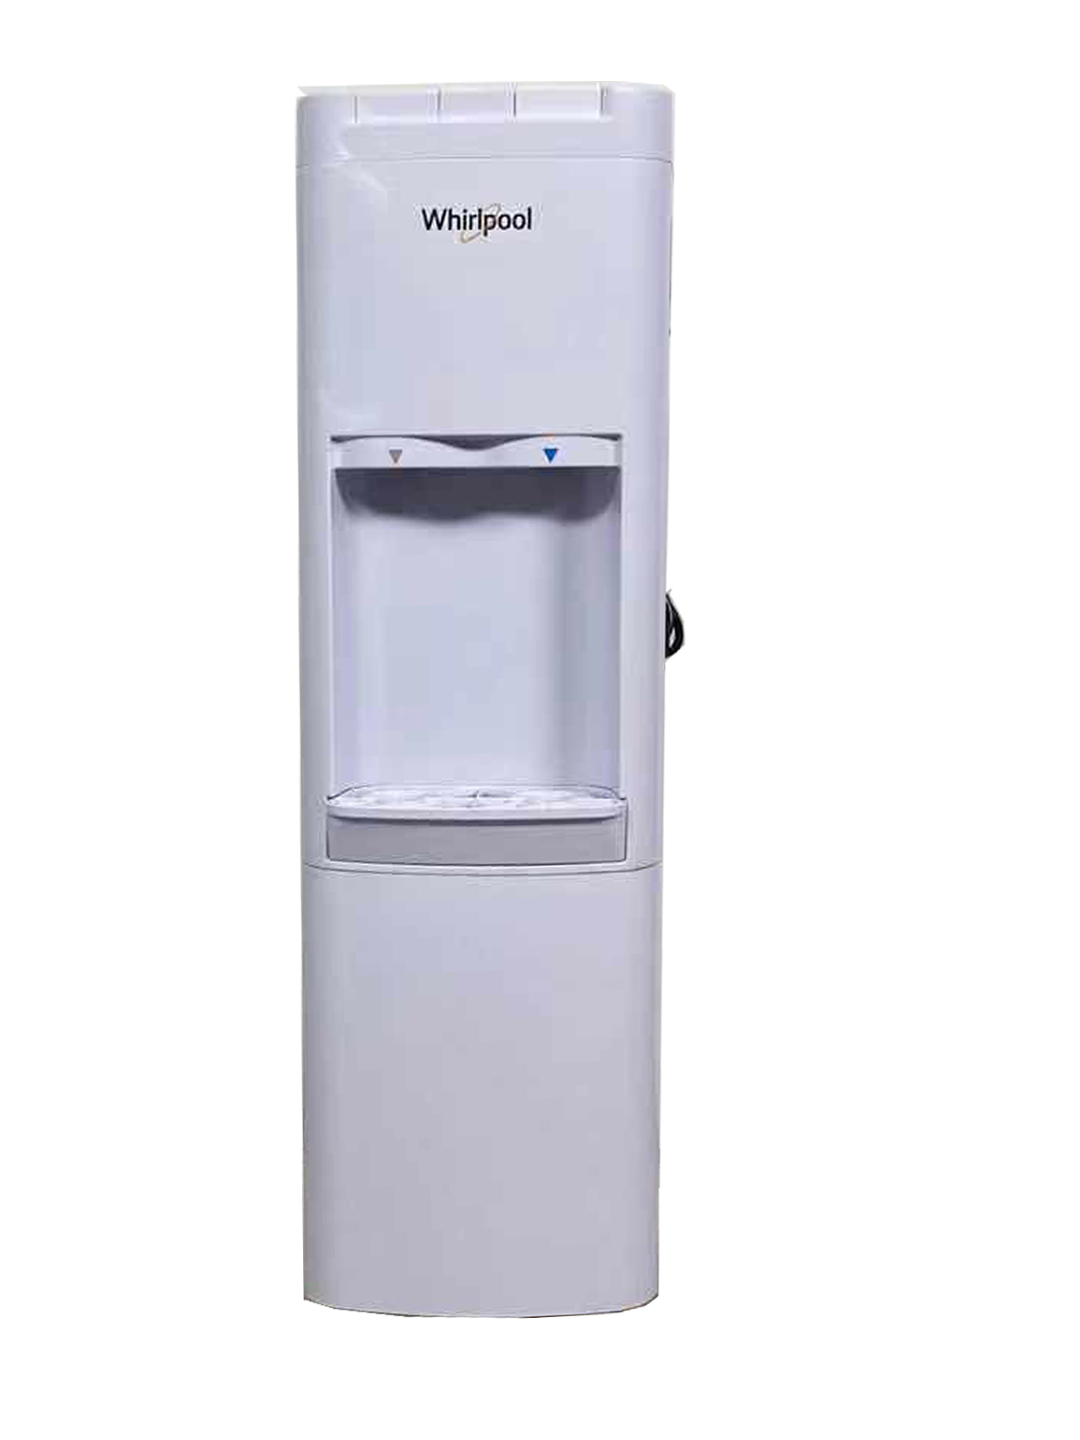 Whirlpool Commercial Water Dispenser Water Cooler with Ice Chilled Water Cooling Technology, White - image 3 of 10